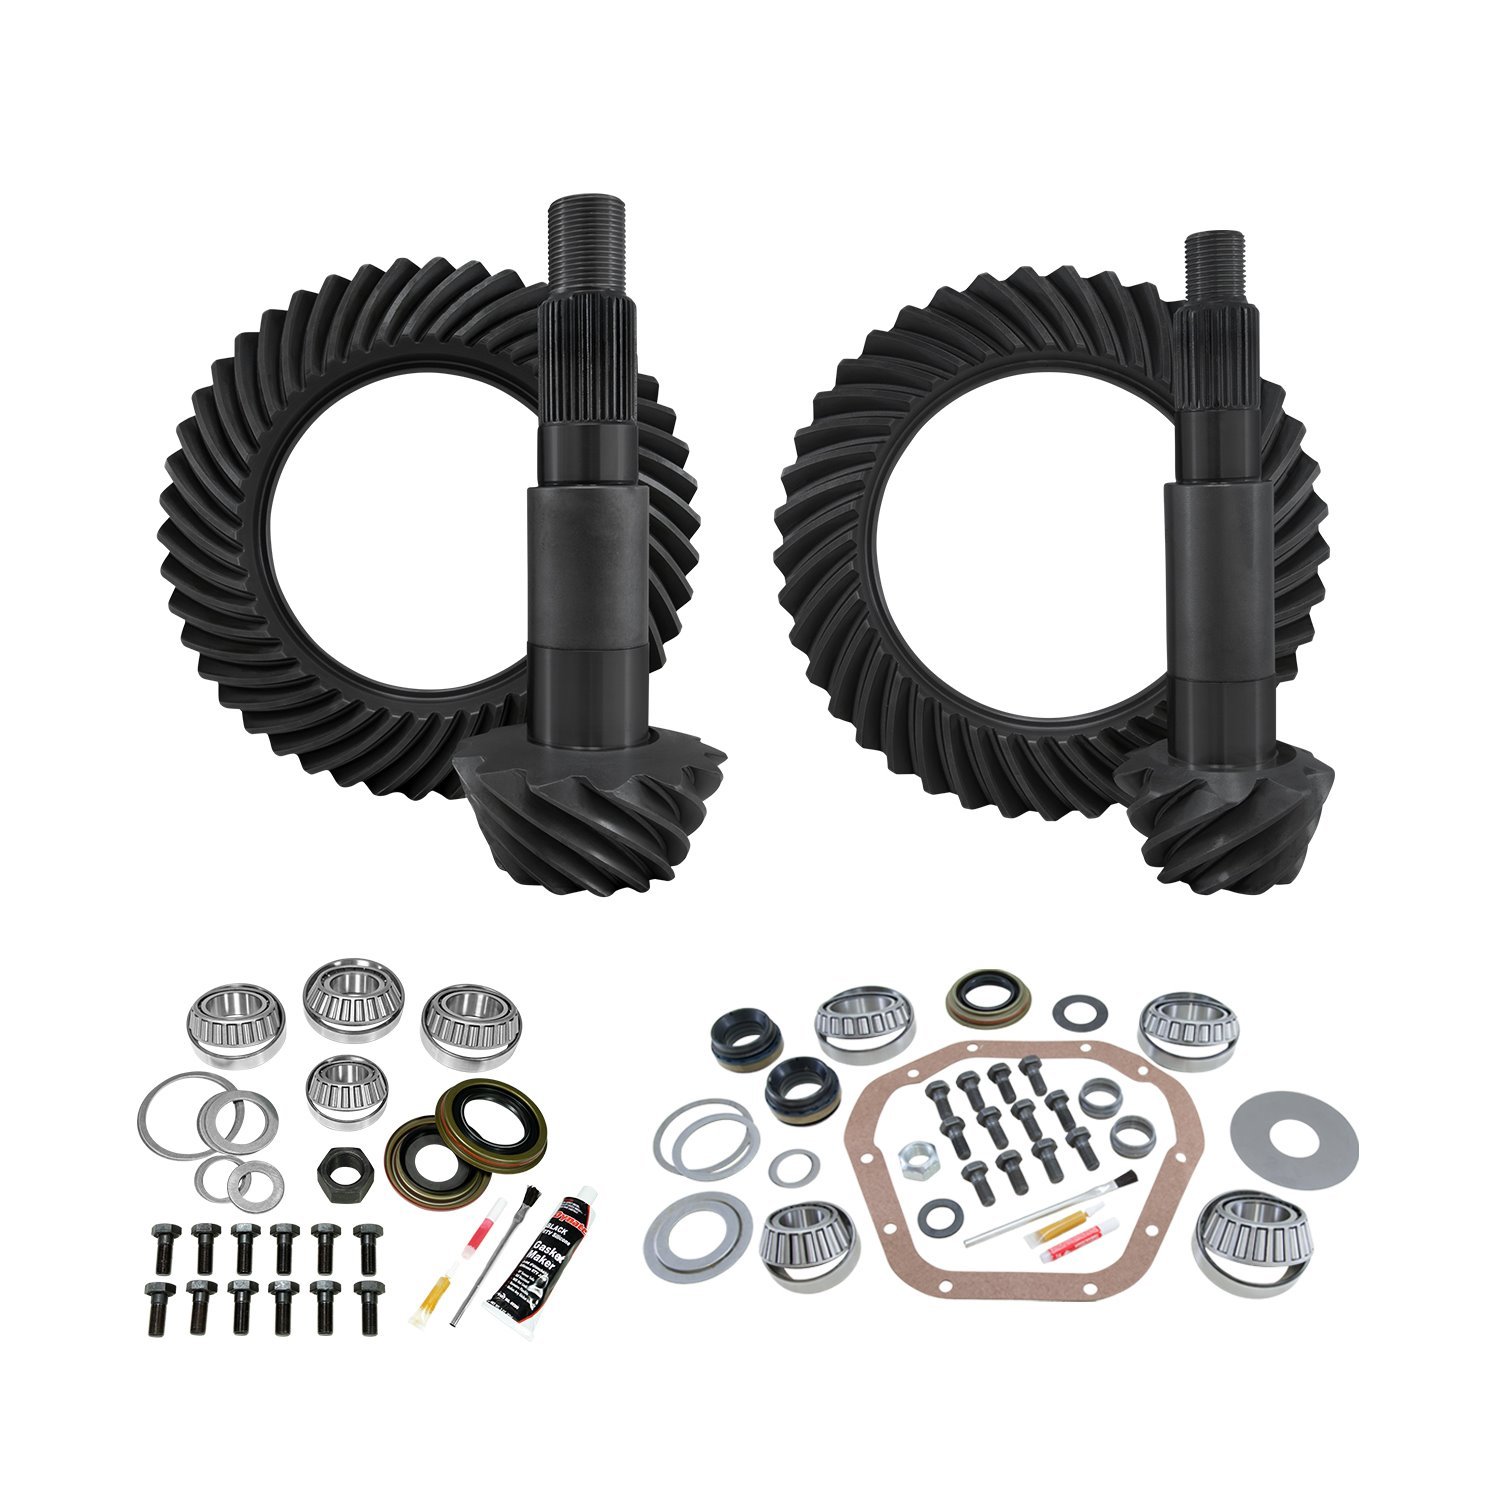 Re-Gear & Install Kit, D60 Reverse/Thick Front, D80 Rear, Ford F350, 5.13